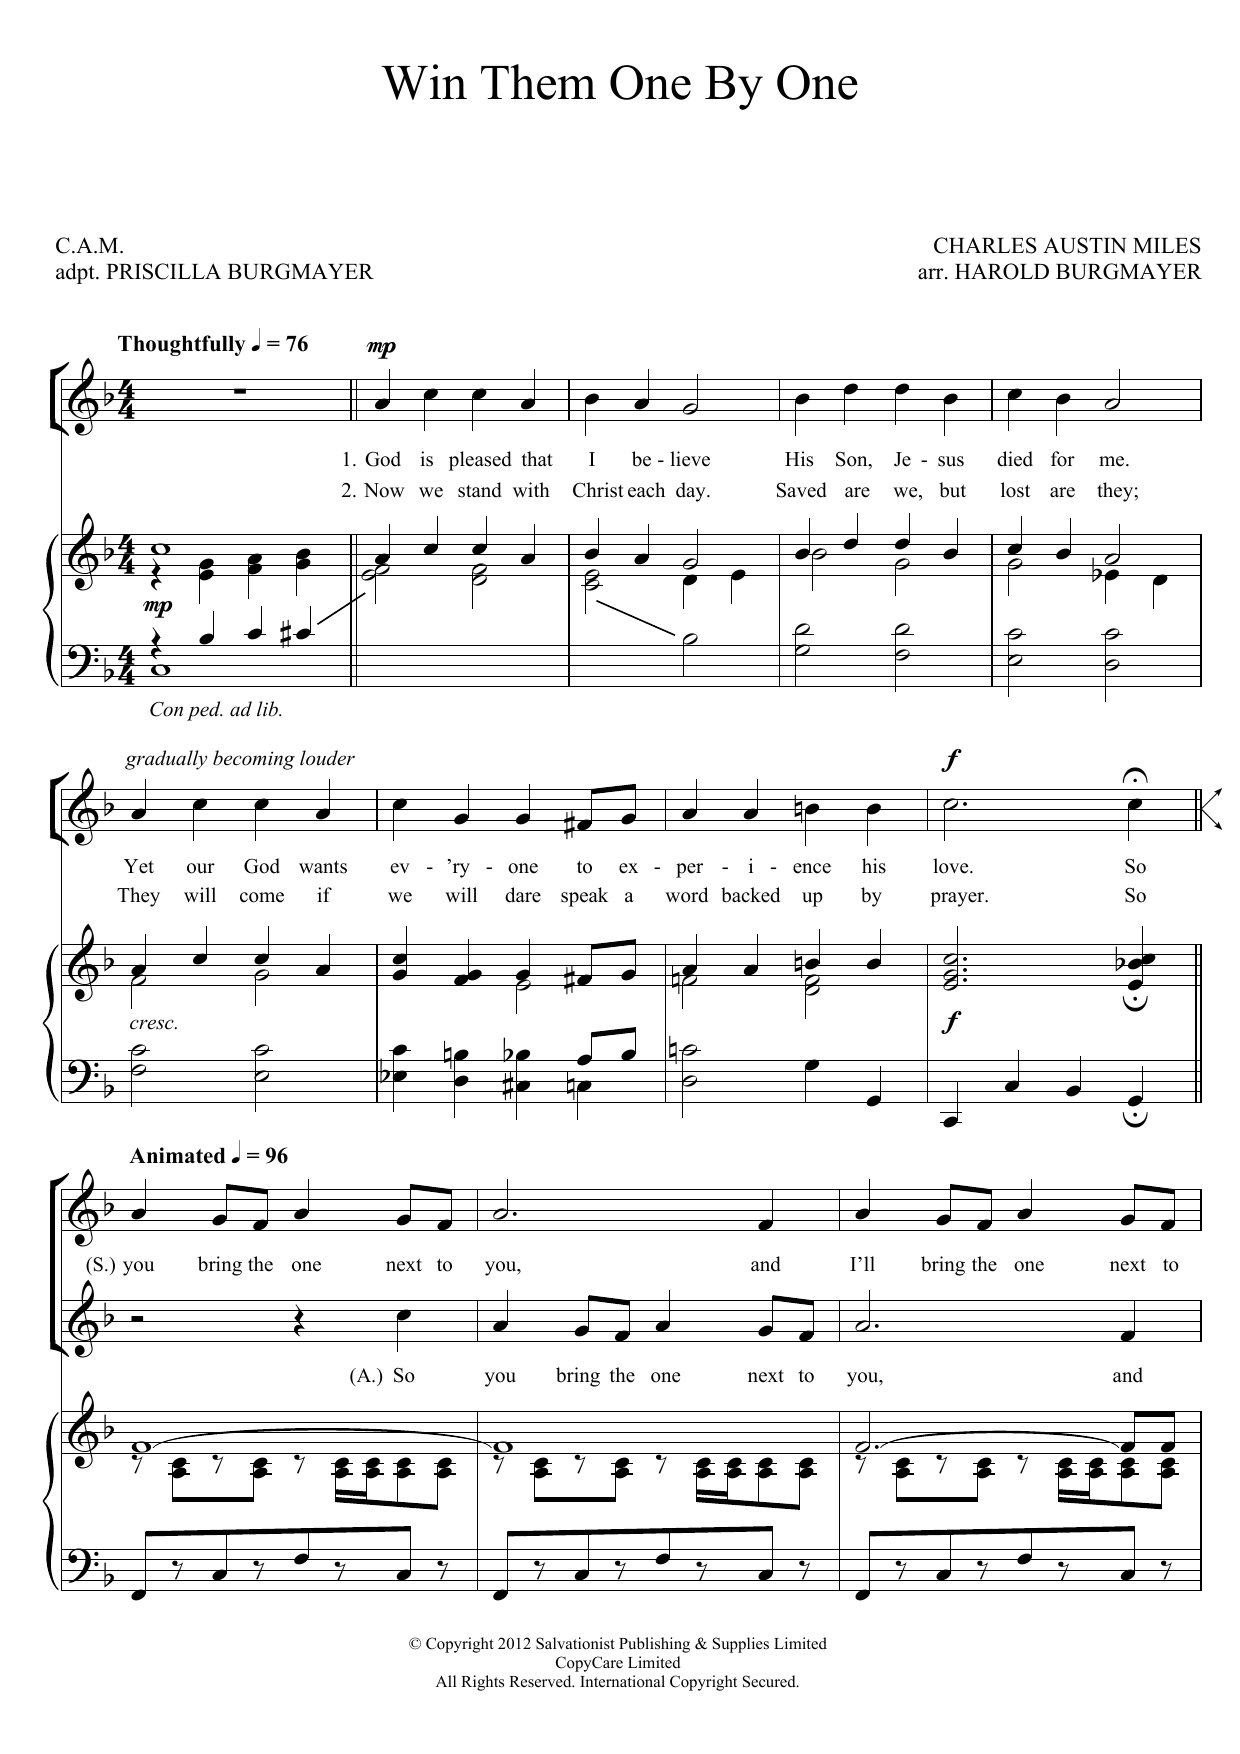 Download The Salvation Army Win Them One By One Sheet Music